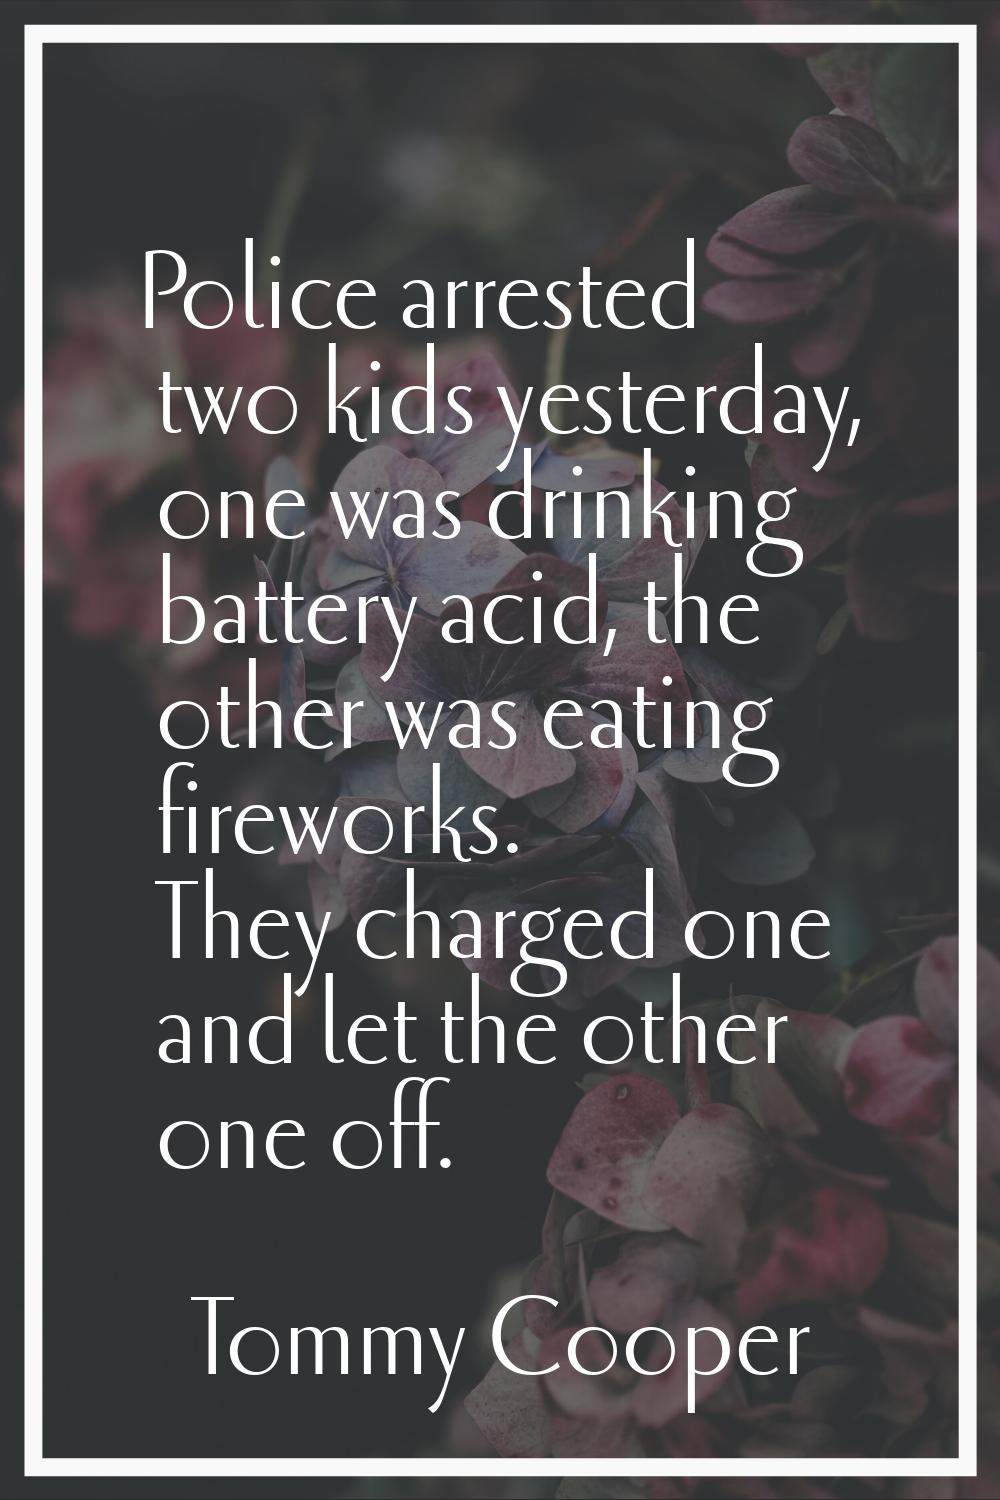 Police arrested two kids yesterday, one was drinking battery acid, the other was eating fireworks. 